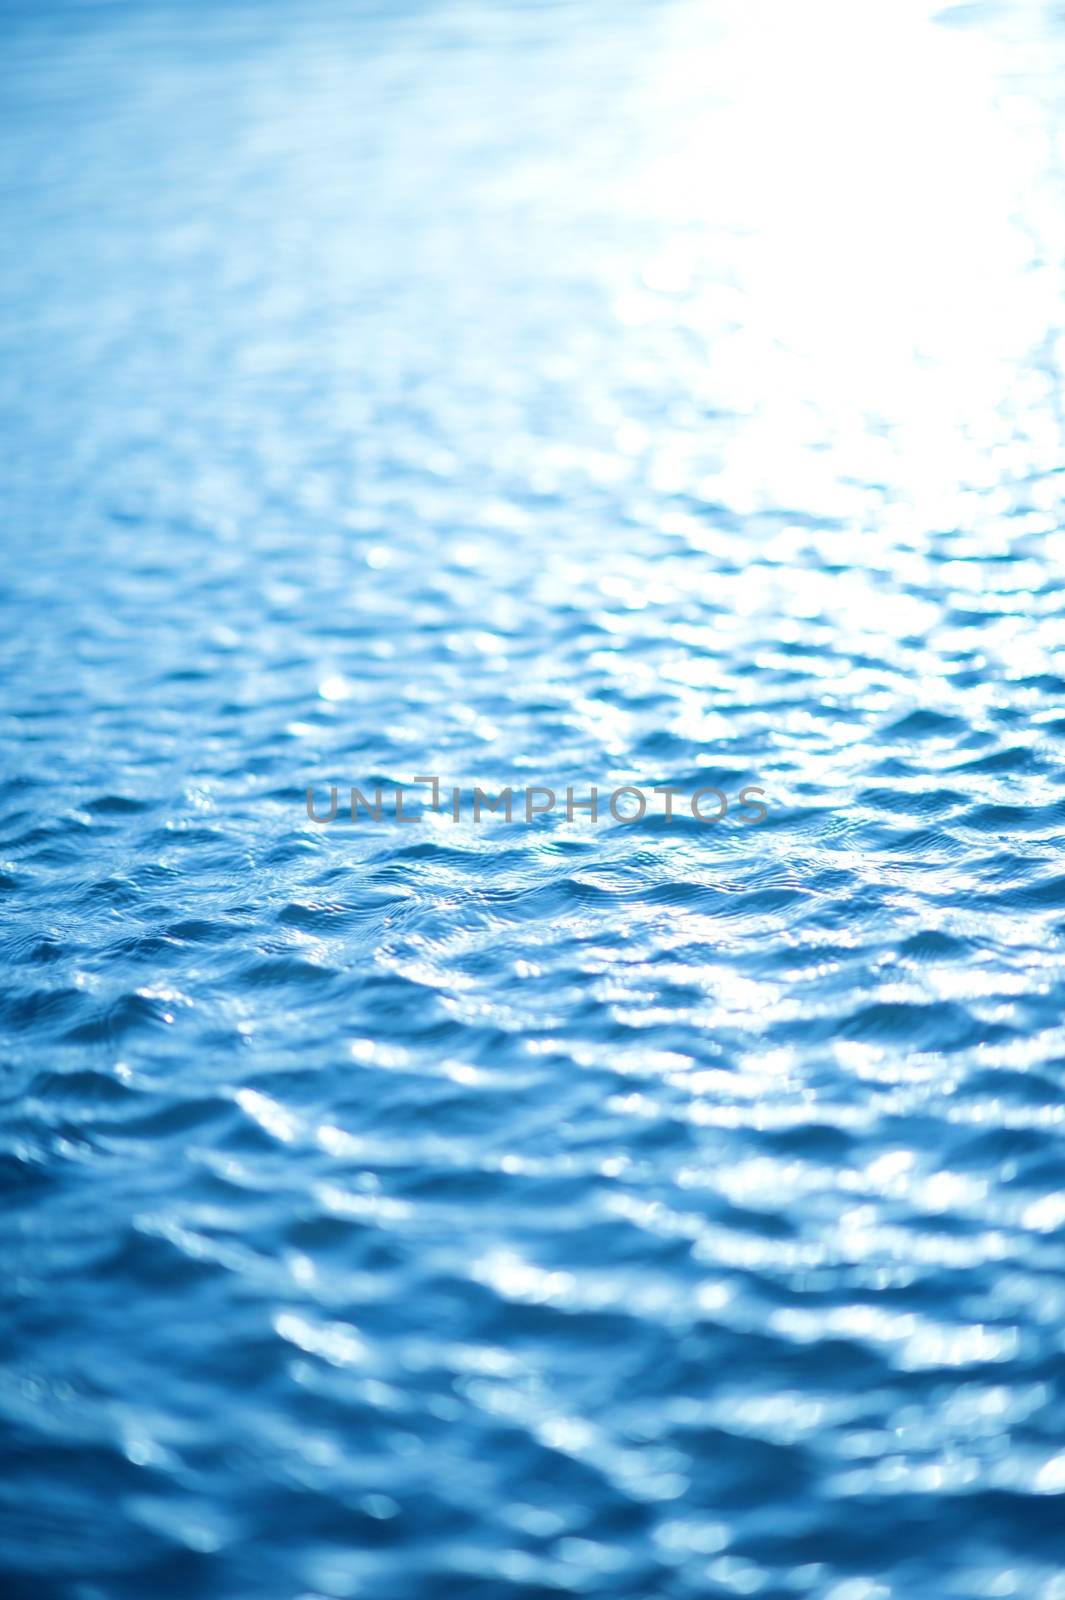 Water Waves Background - Blue Tones Water Surface. Vertical Photography.